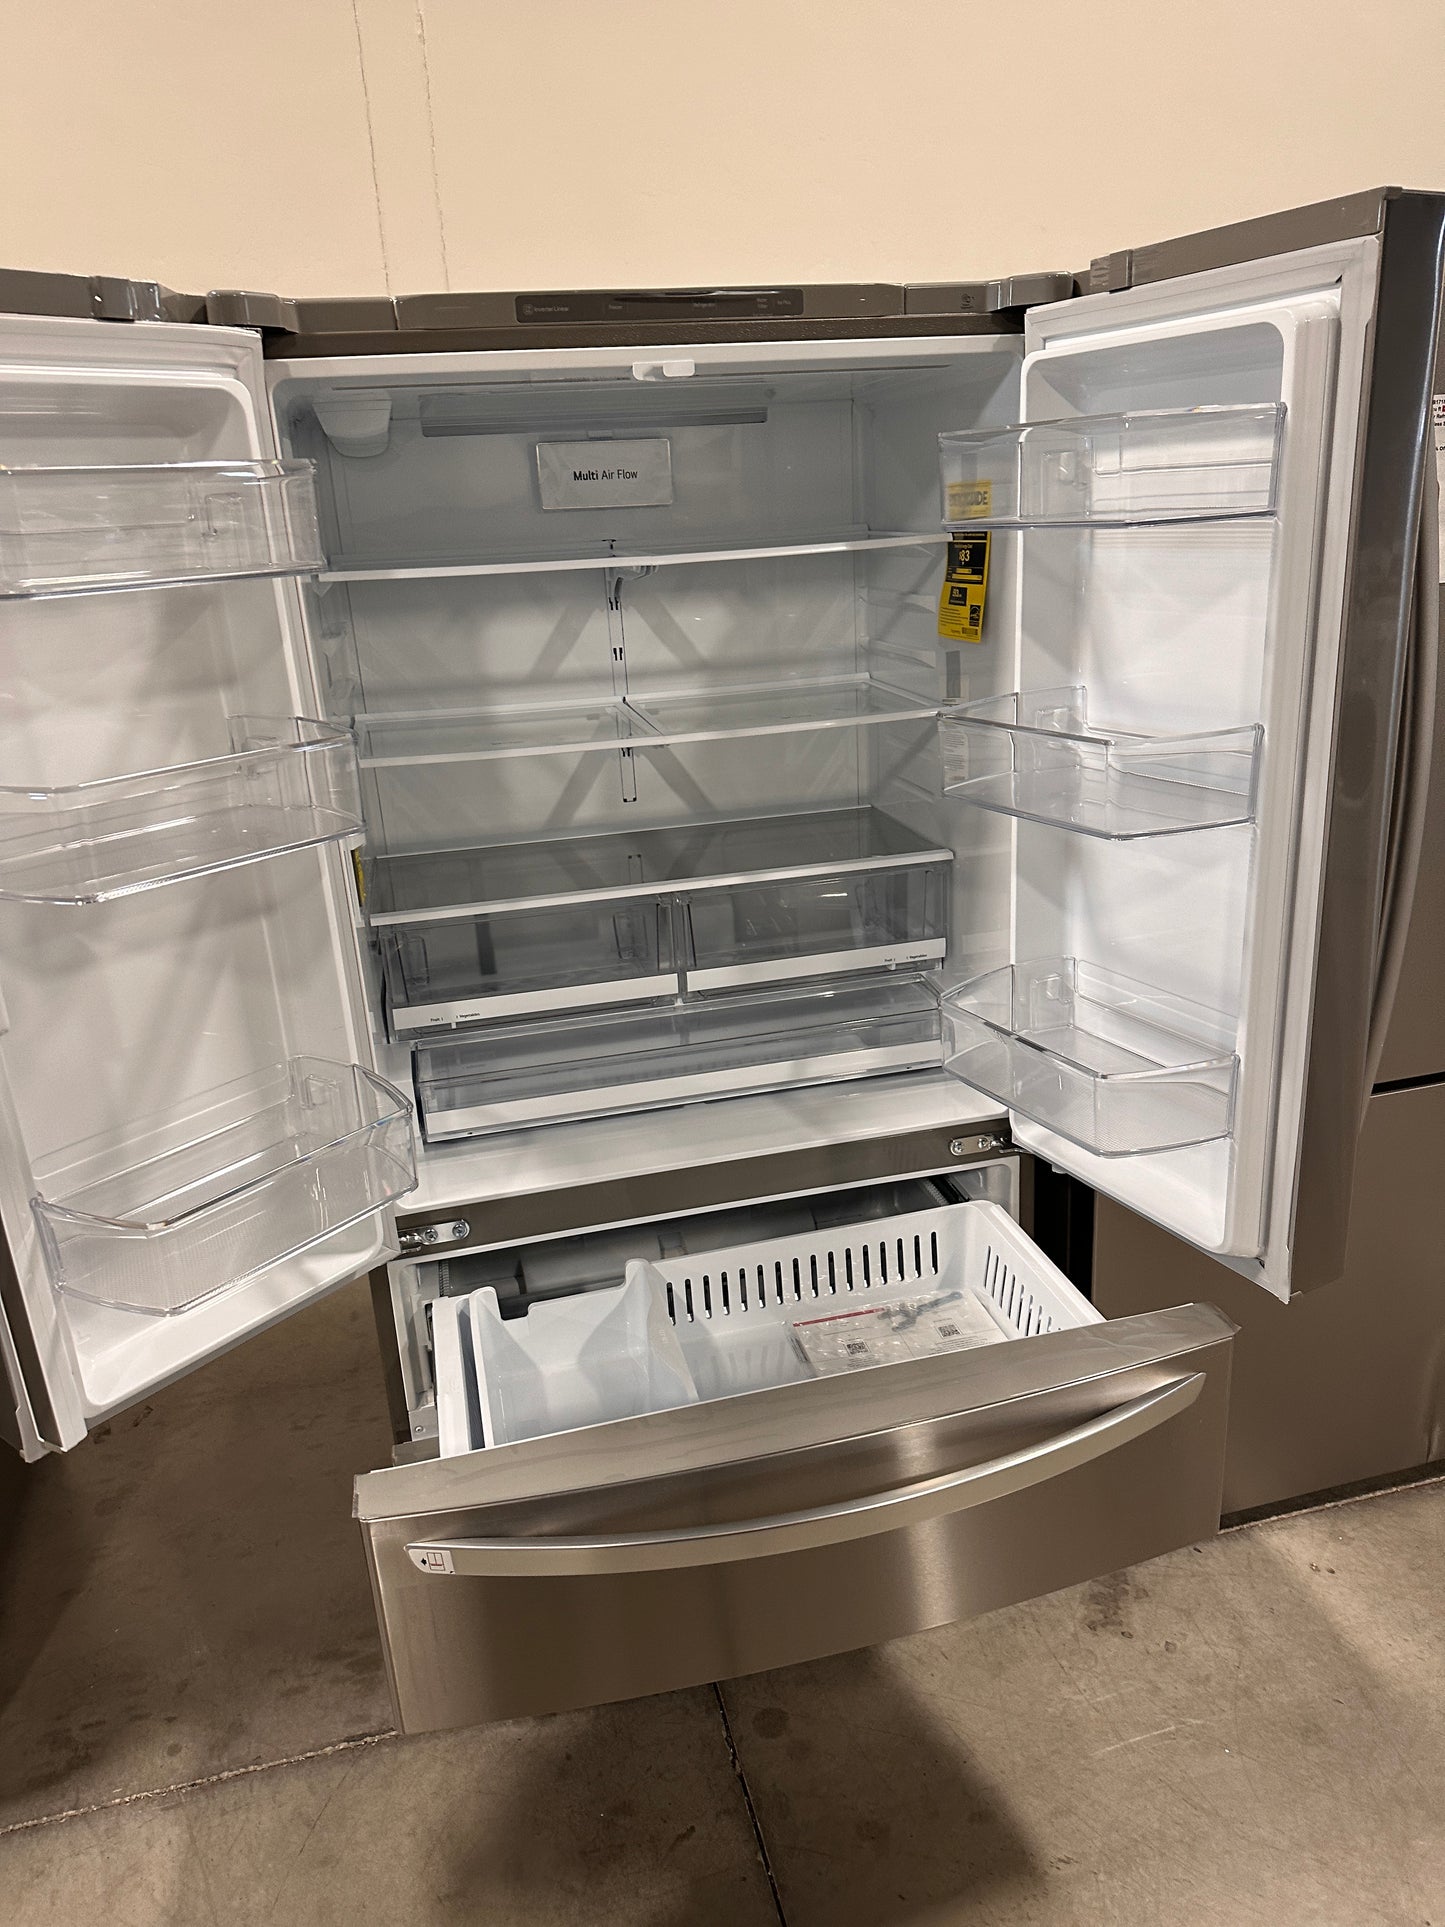 NEW LG COUNTER DEPTH REFRIGERATOR WITH DOUBLE FREEZER MODEL: LMWC23626S REF13226